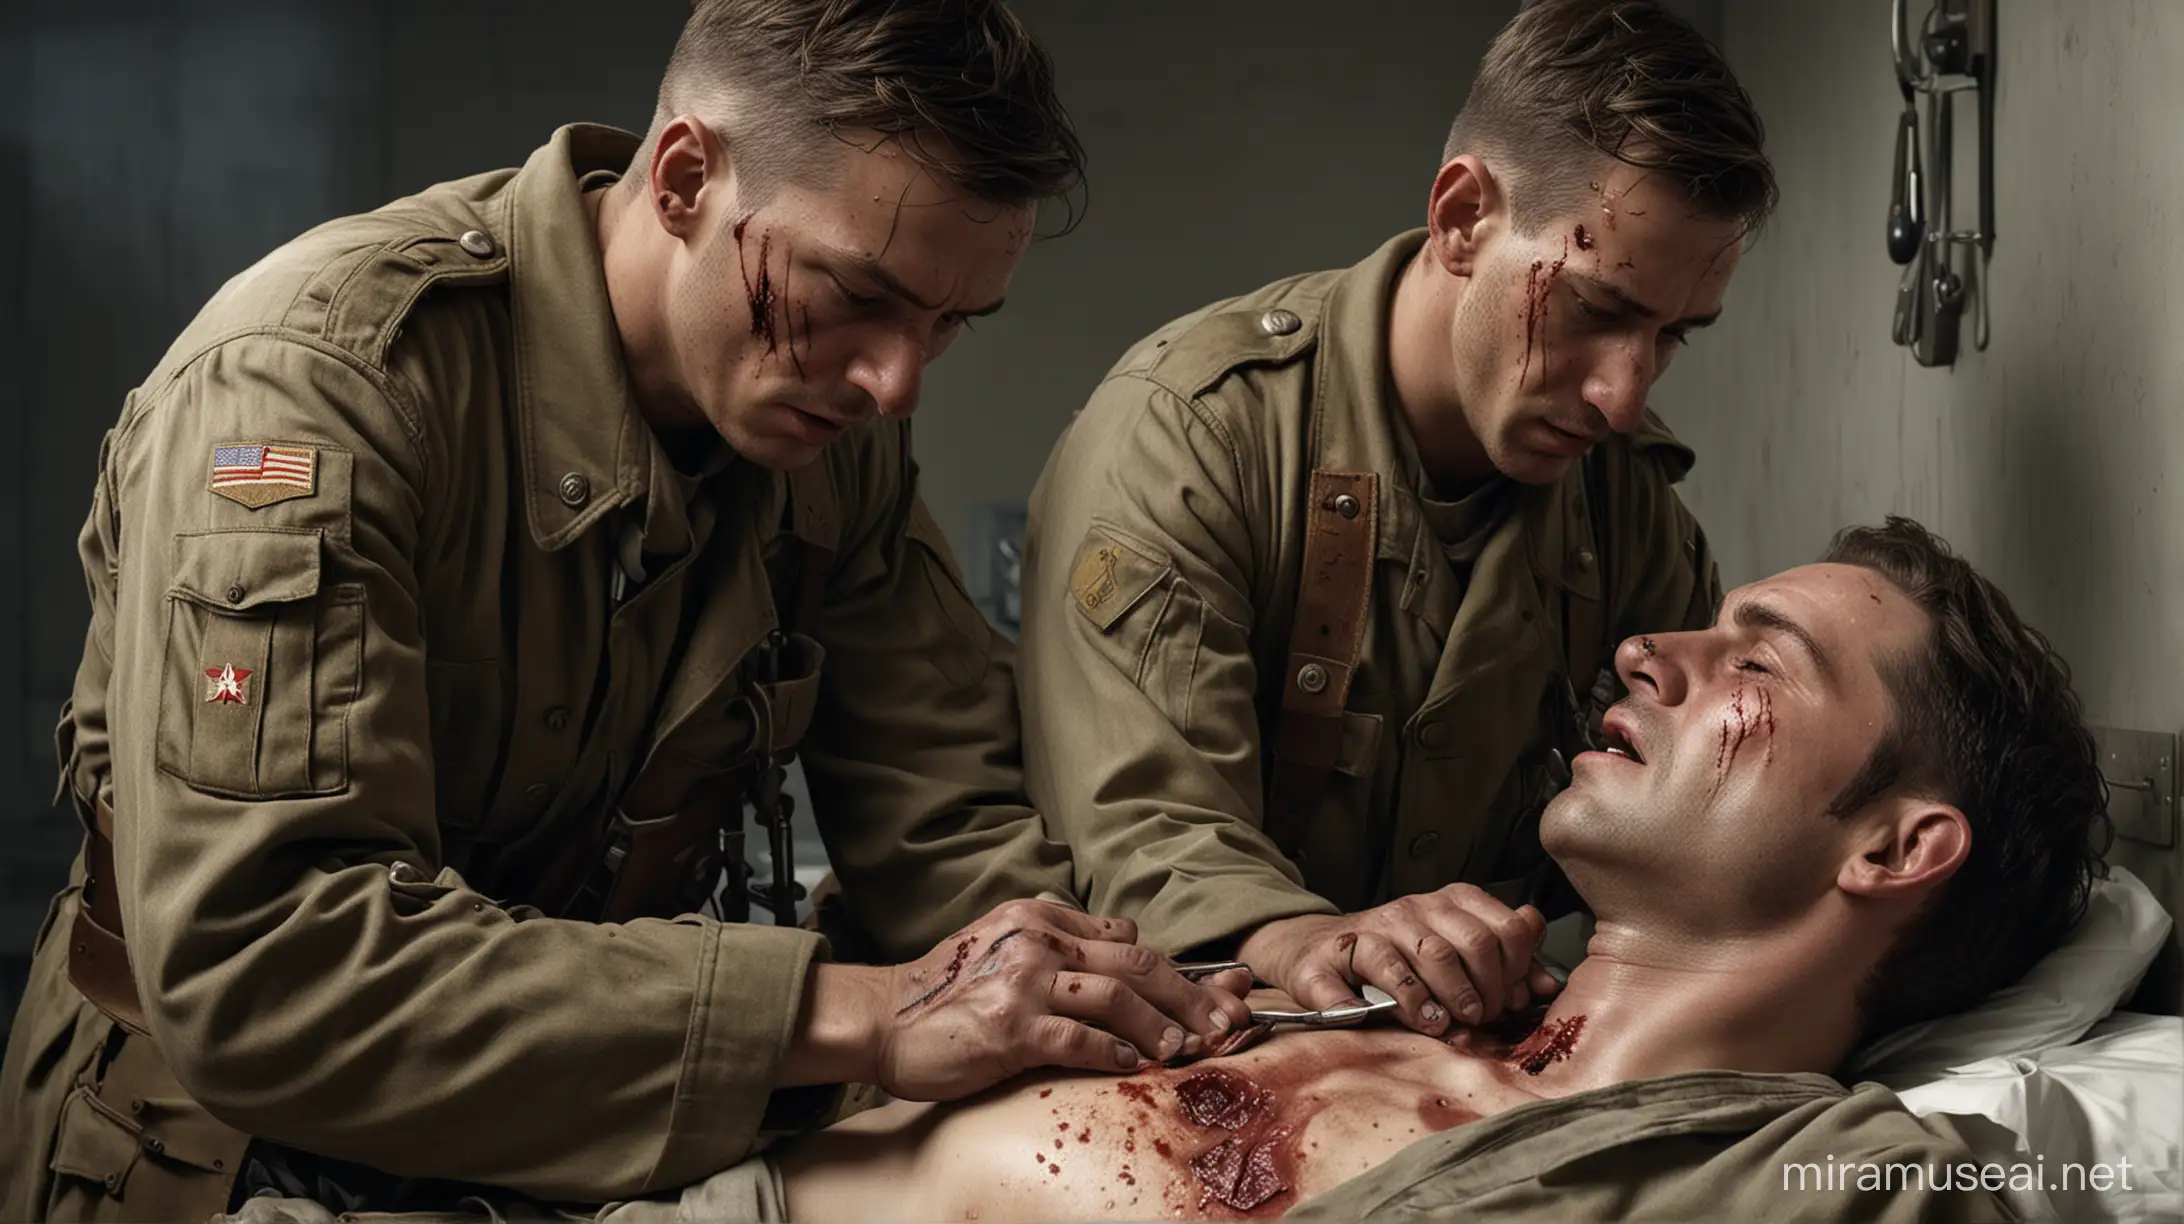 Generate a 4K hyperrealistic image depicting a soldier with a wounded hand in World War II  writhing in pain as he gets treatment from a doctor. Ensure the 3D rendering is highly detailed, showcasing the soldier's agonized expression and bloodied uniform as the doctor tends to the injury. Utilize HDR lighting to enhance the dramatic atmosphere, with photorealistic textures conveying the severity of the soldier's trauma. Incorporate high-resolution elements of the medical setting, including surgical instruments and bandages, to add authenticity to the scene. The image should evoke a sense of empathy and the brutal reality of war.